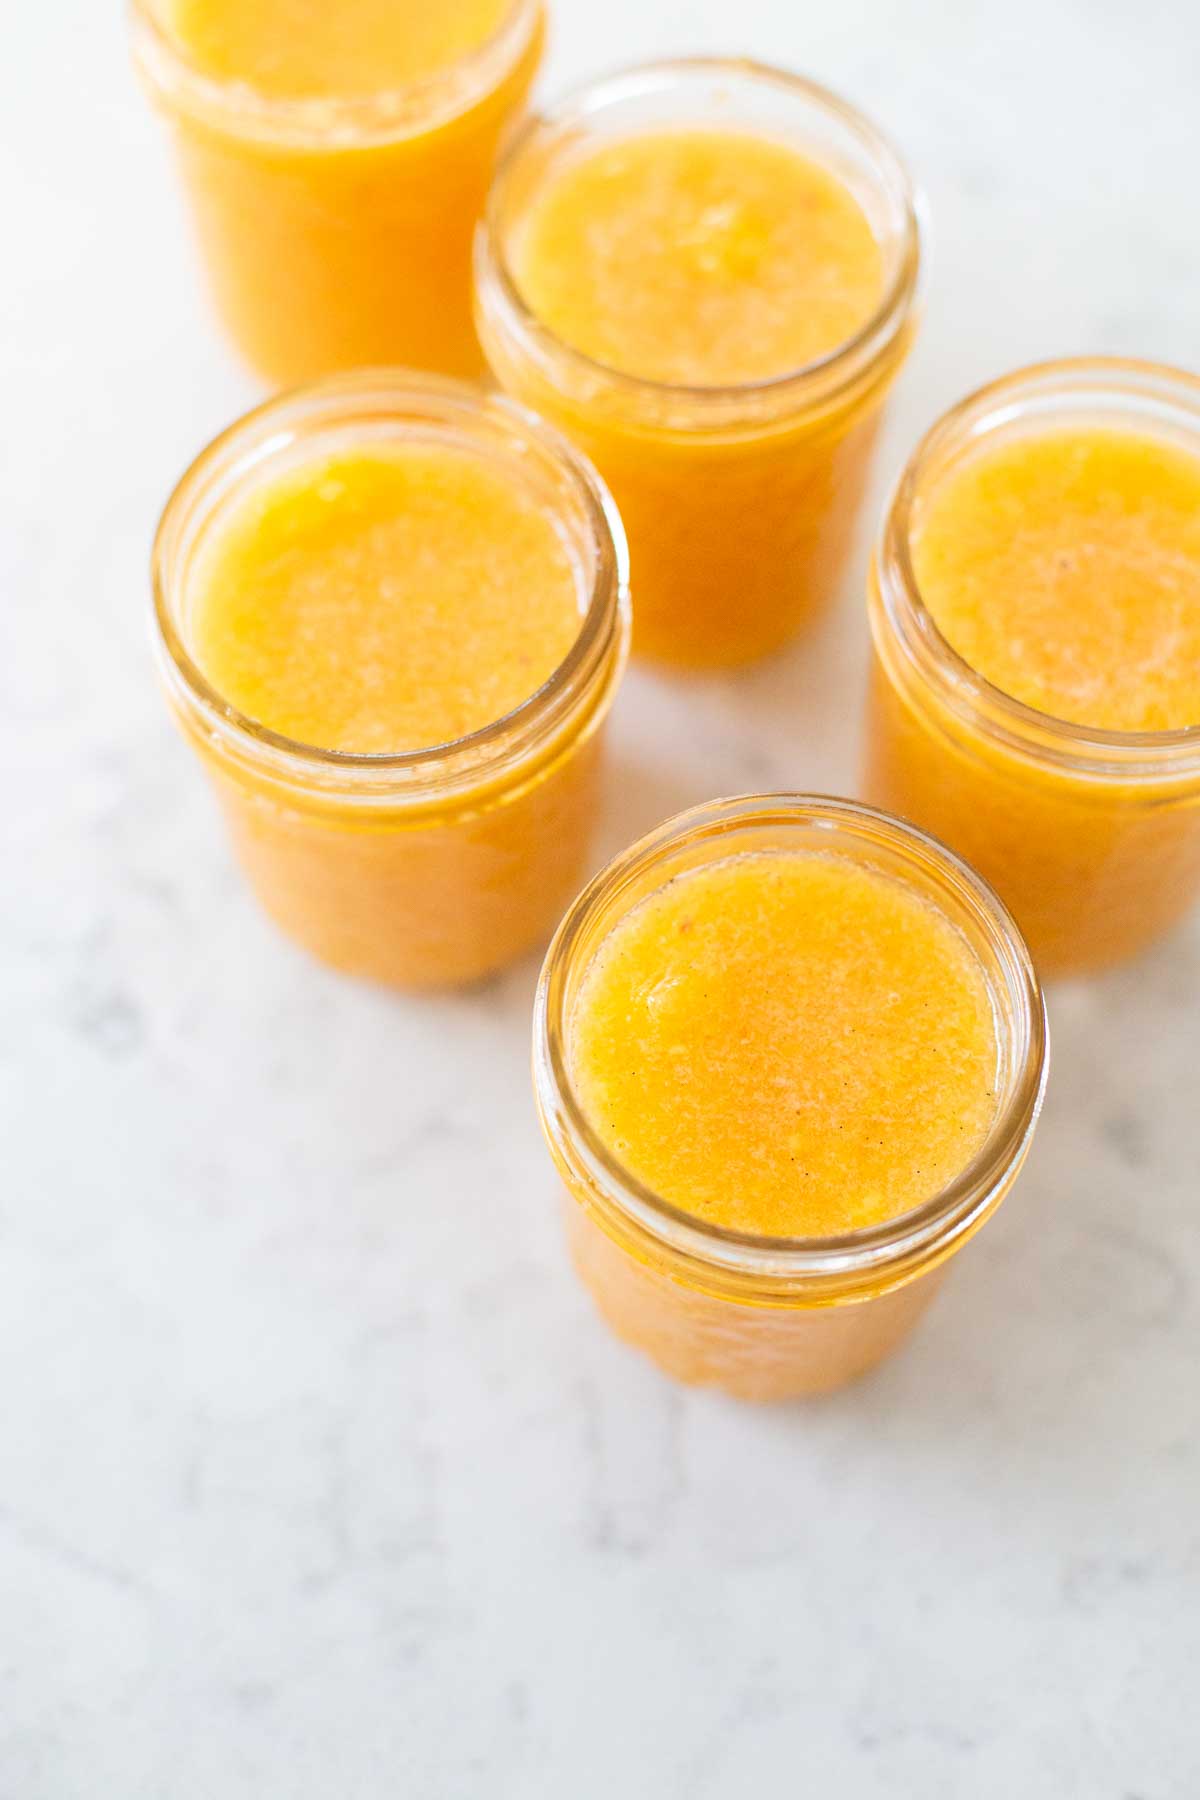 Jelly jars have been filled with fresh peach jam.